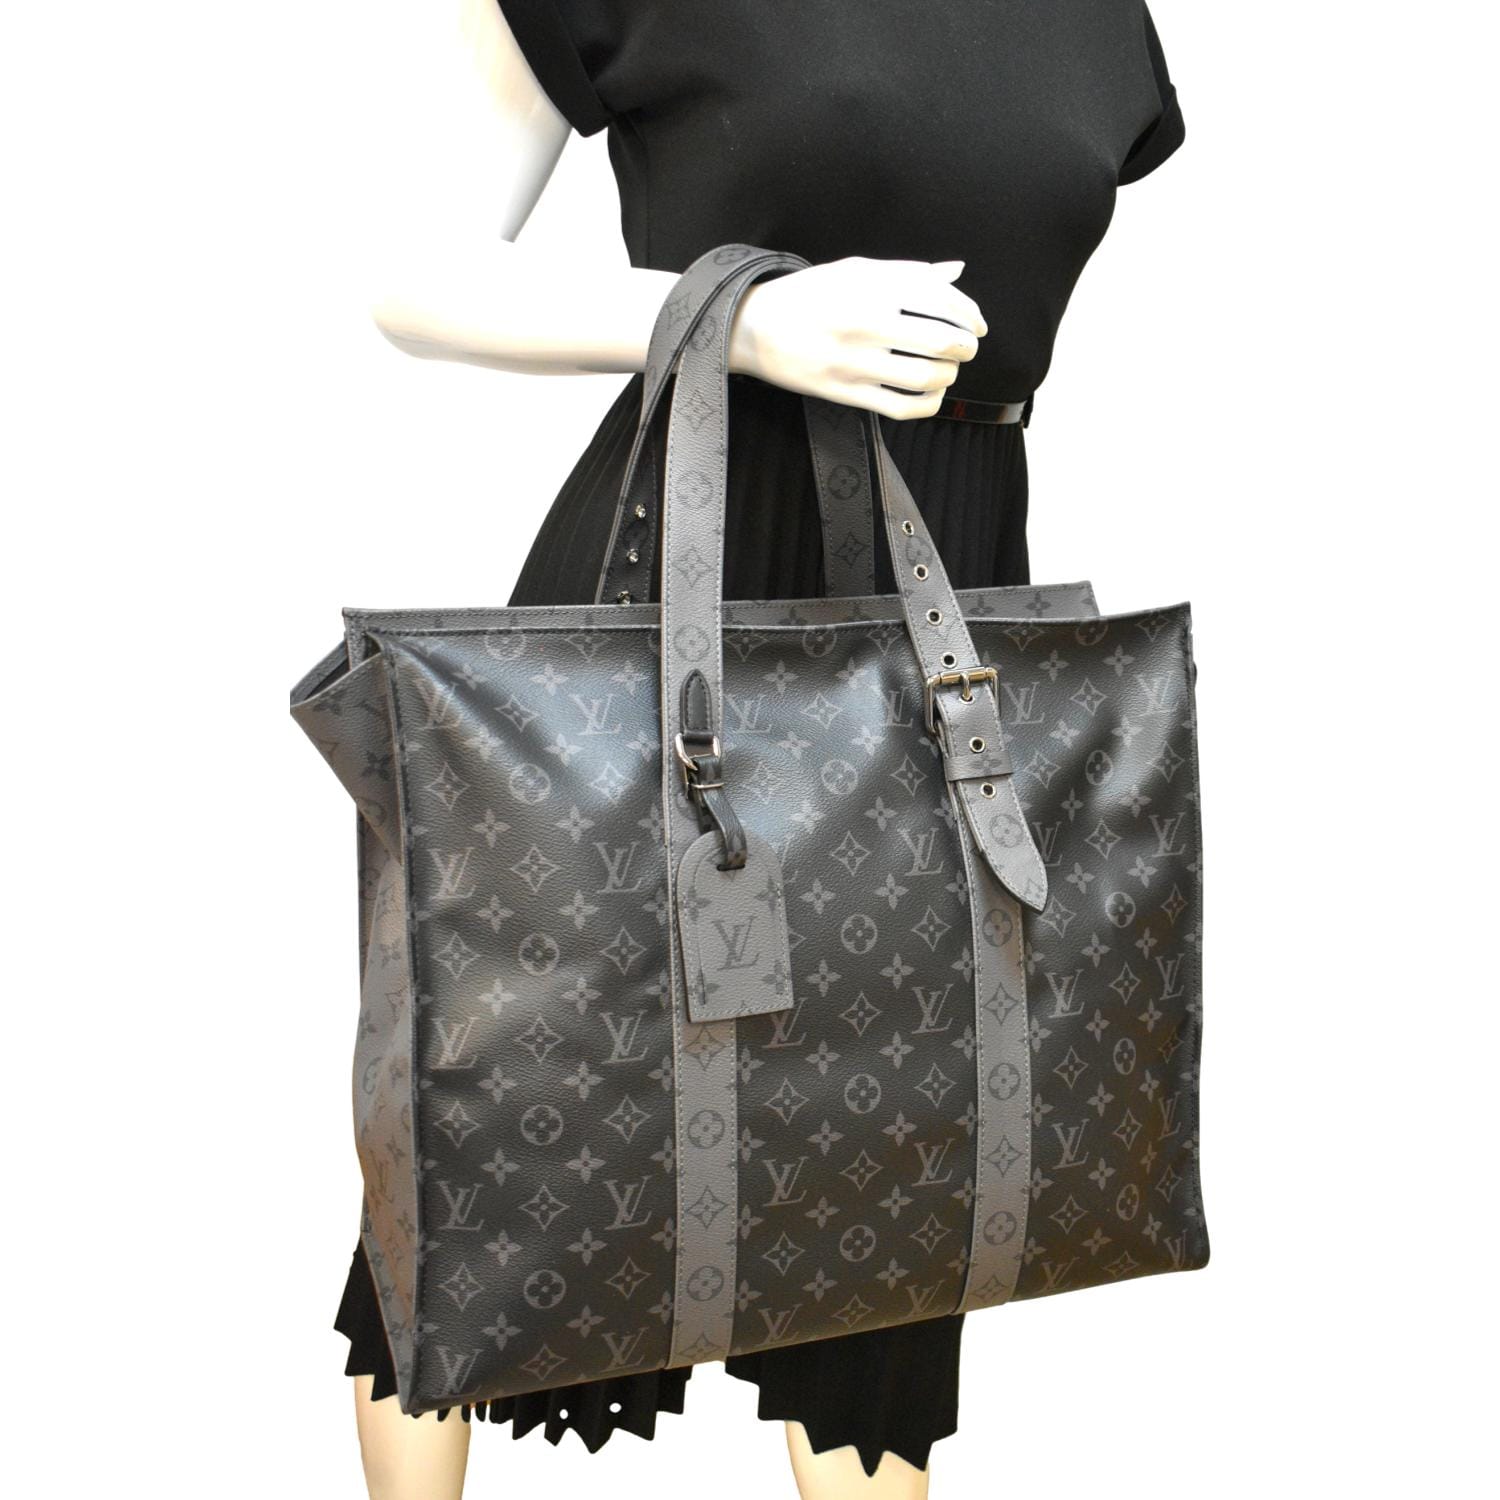 Louis Vuitton Box Large Bags & Handbags for Women, Authenticity Guaranteed